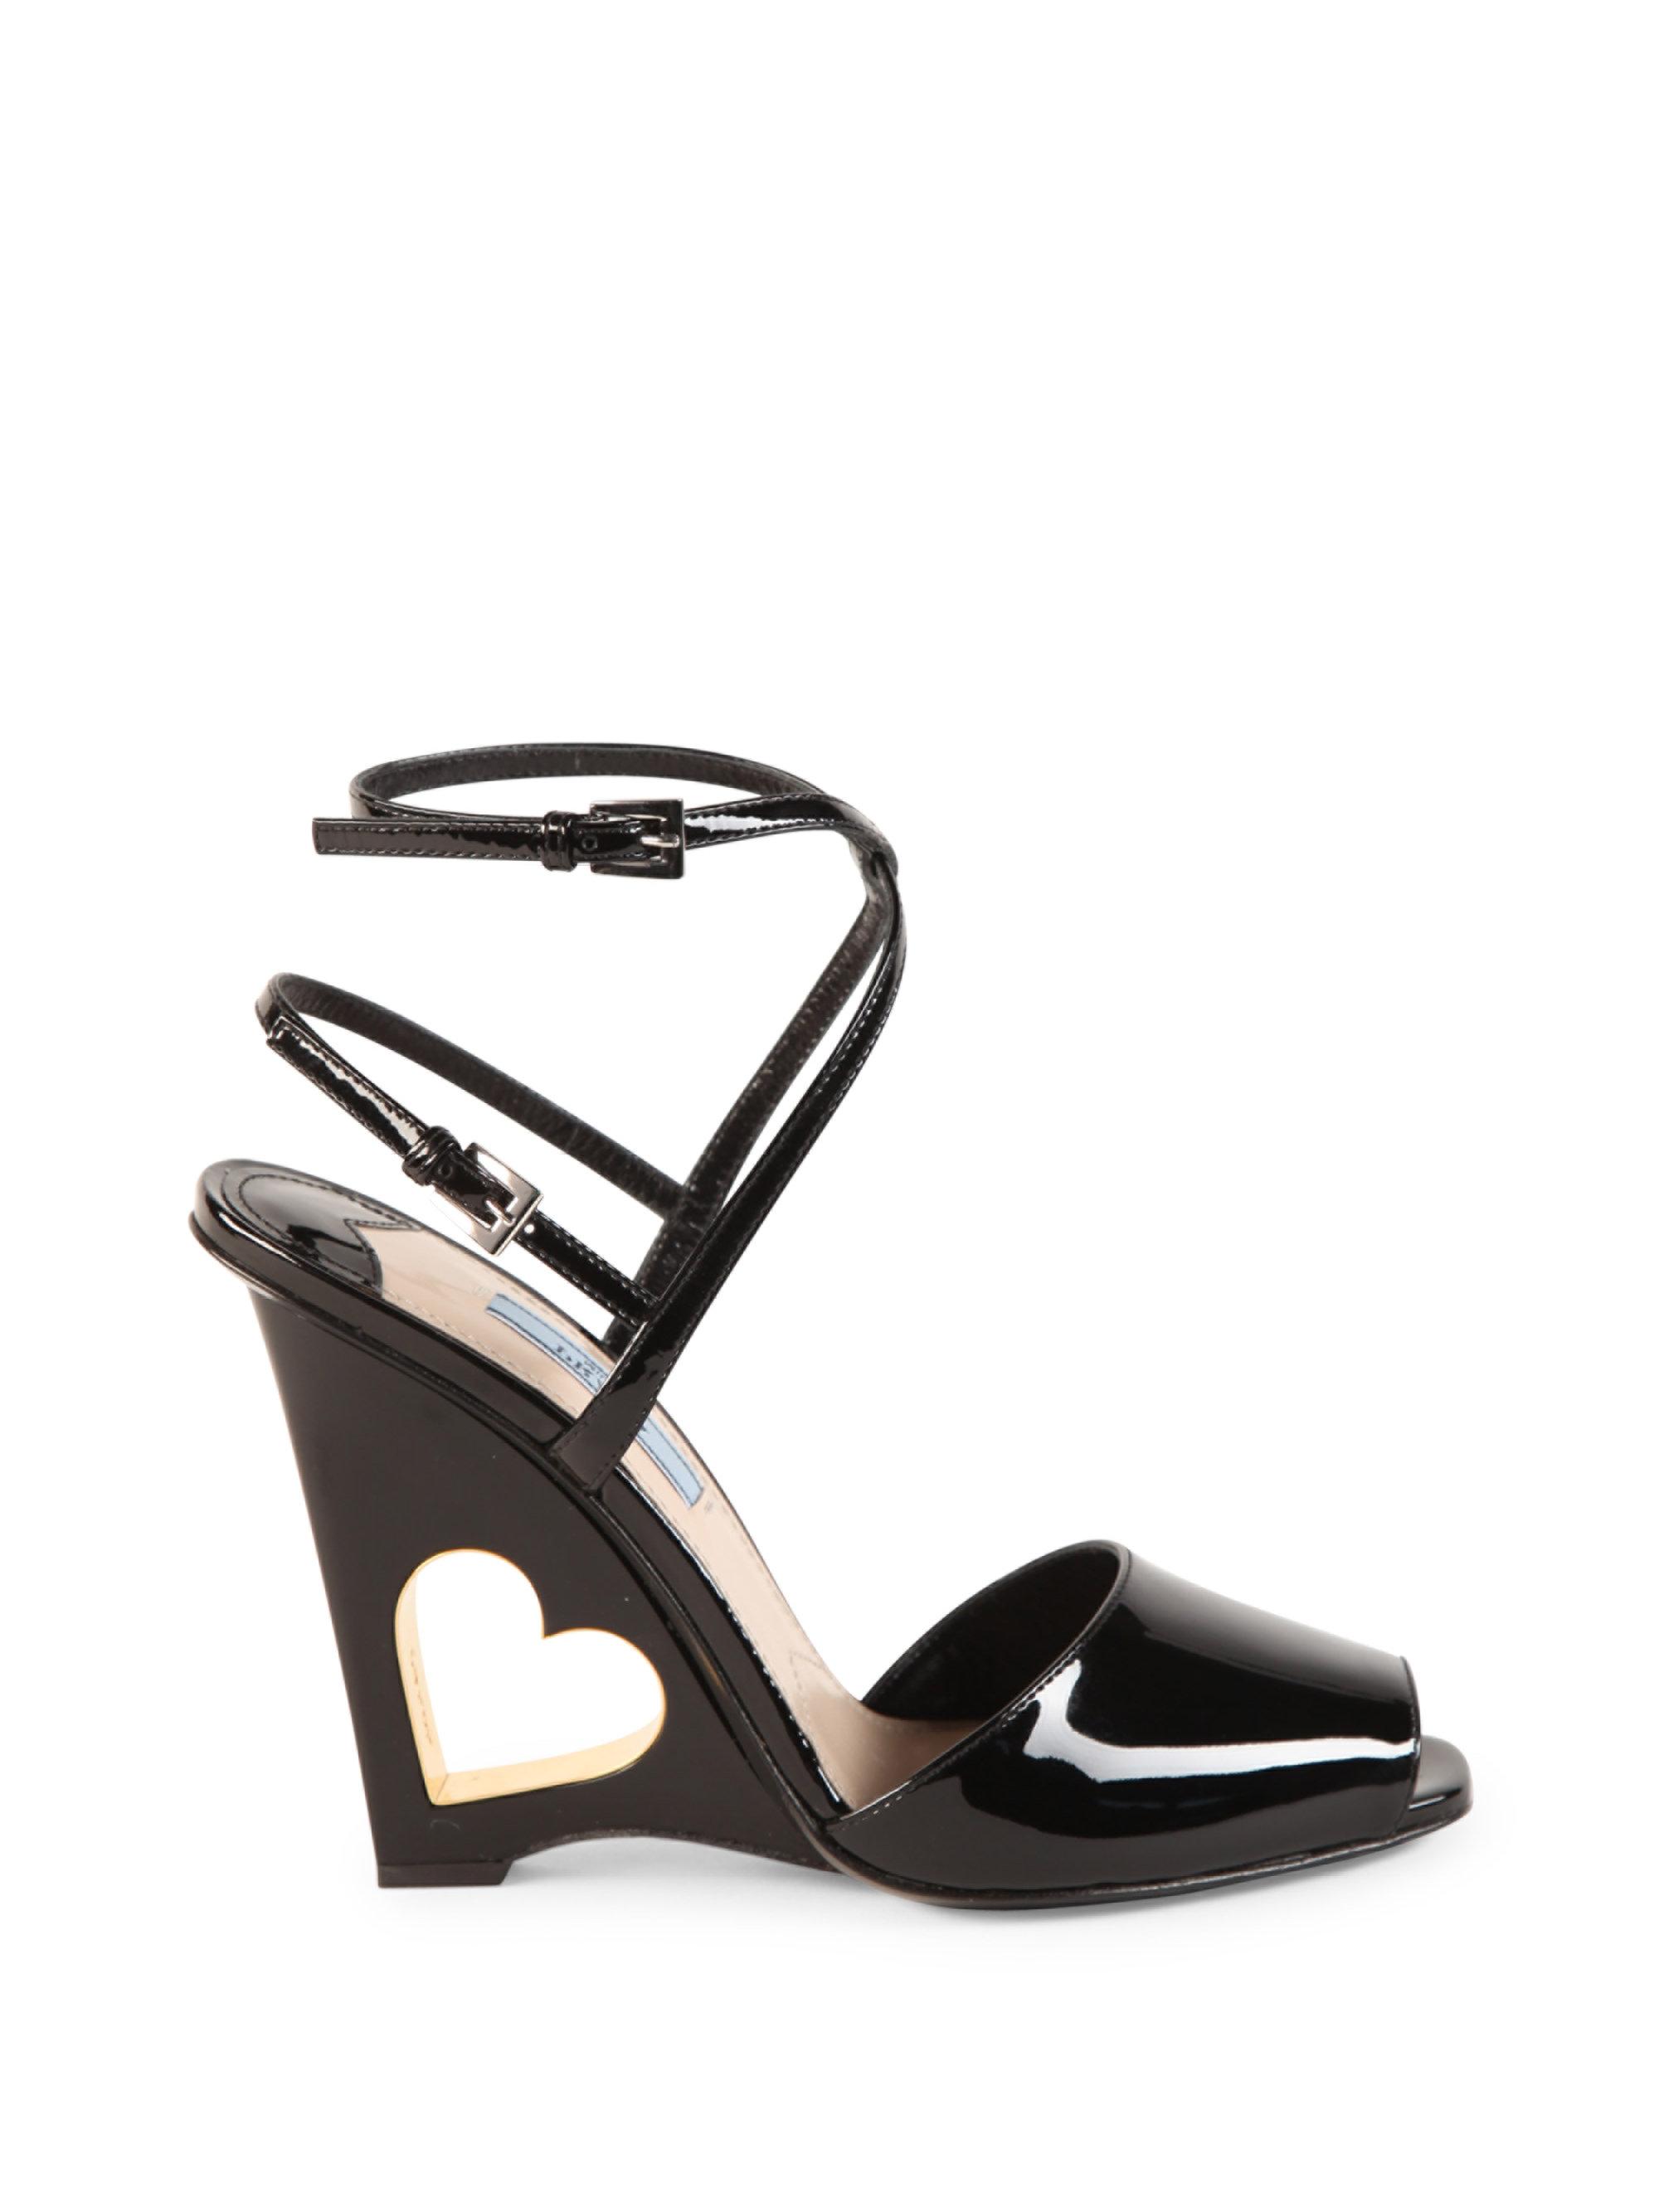 Prada Patent Leather Cutout Heart Wedge Sandals in Black | Lyst